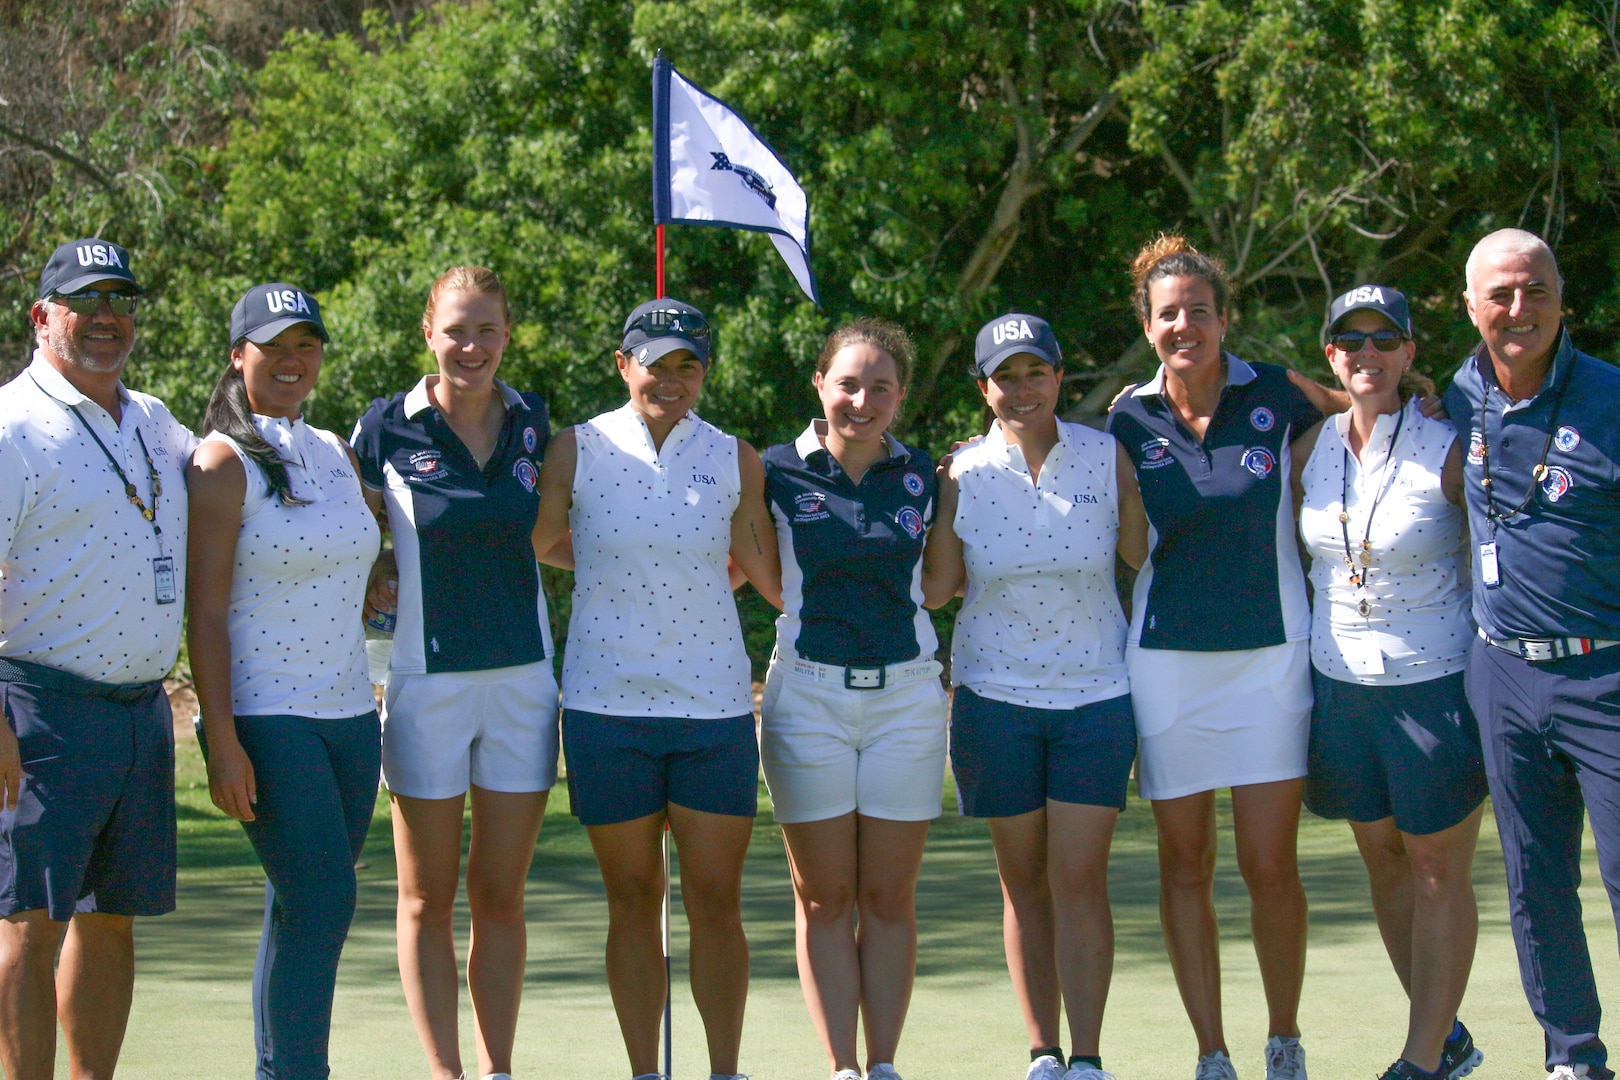 Team USA and France celebrate the end of the women's competition with USA winning gold and France capturing silver. 14th Edition of the Conseil International du Sport Militaire (CISM) World Military Golf Championship held at the Admiral Baker Golf Course in San Diego, Calif., hosted by Naval Base San Diego, Calif.  Nations from Bahrain, Canada, Denmark, Dominican Republic, Estonia, France, Germany, Ireland, Italy, Kazakhstan, Kenya, Latvia, Netherlands, Sri Lanka, Tanzania, Zimbabwe, and host USA compete for gold. Department of Defense Photo by Ms. Theresa Smith - Released.